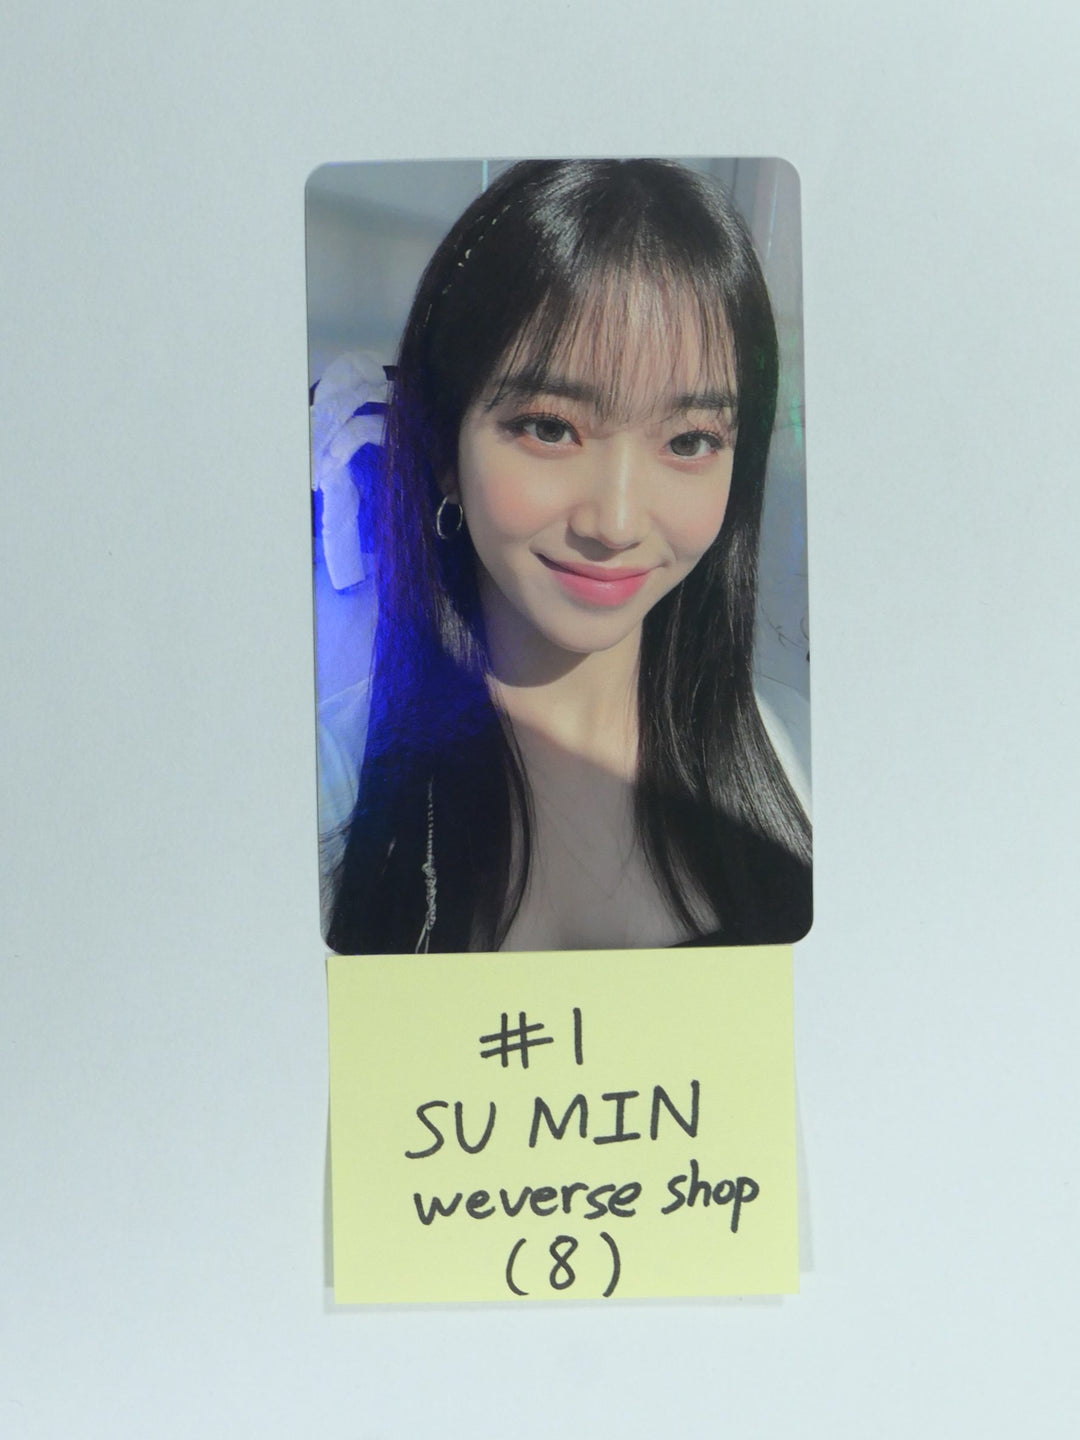 StayC「YOUNG-LUV.COM」 - Weverse Shop 予約特典ホログラムフォトカード [2/24更新]